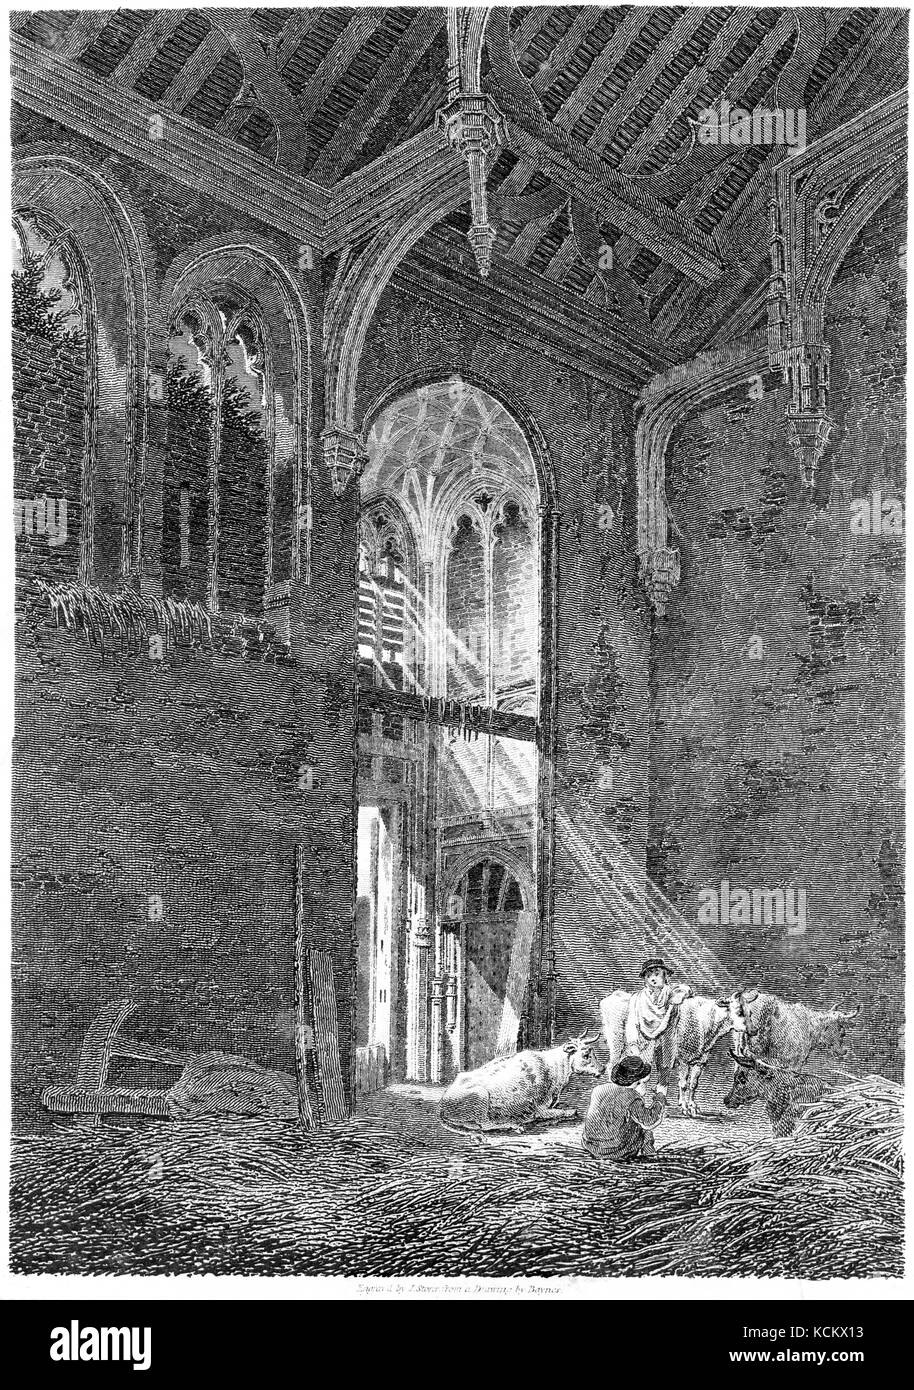 An engraving of the Interior of the Hall of Eltham Palace, Kent scanned at high resolution from a book printed in 1819.  Believed copyright free. Stock Photo